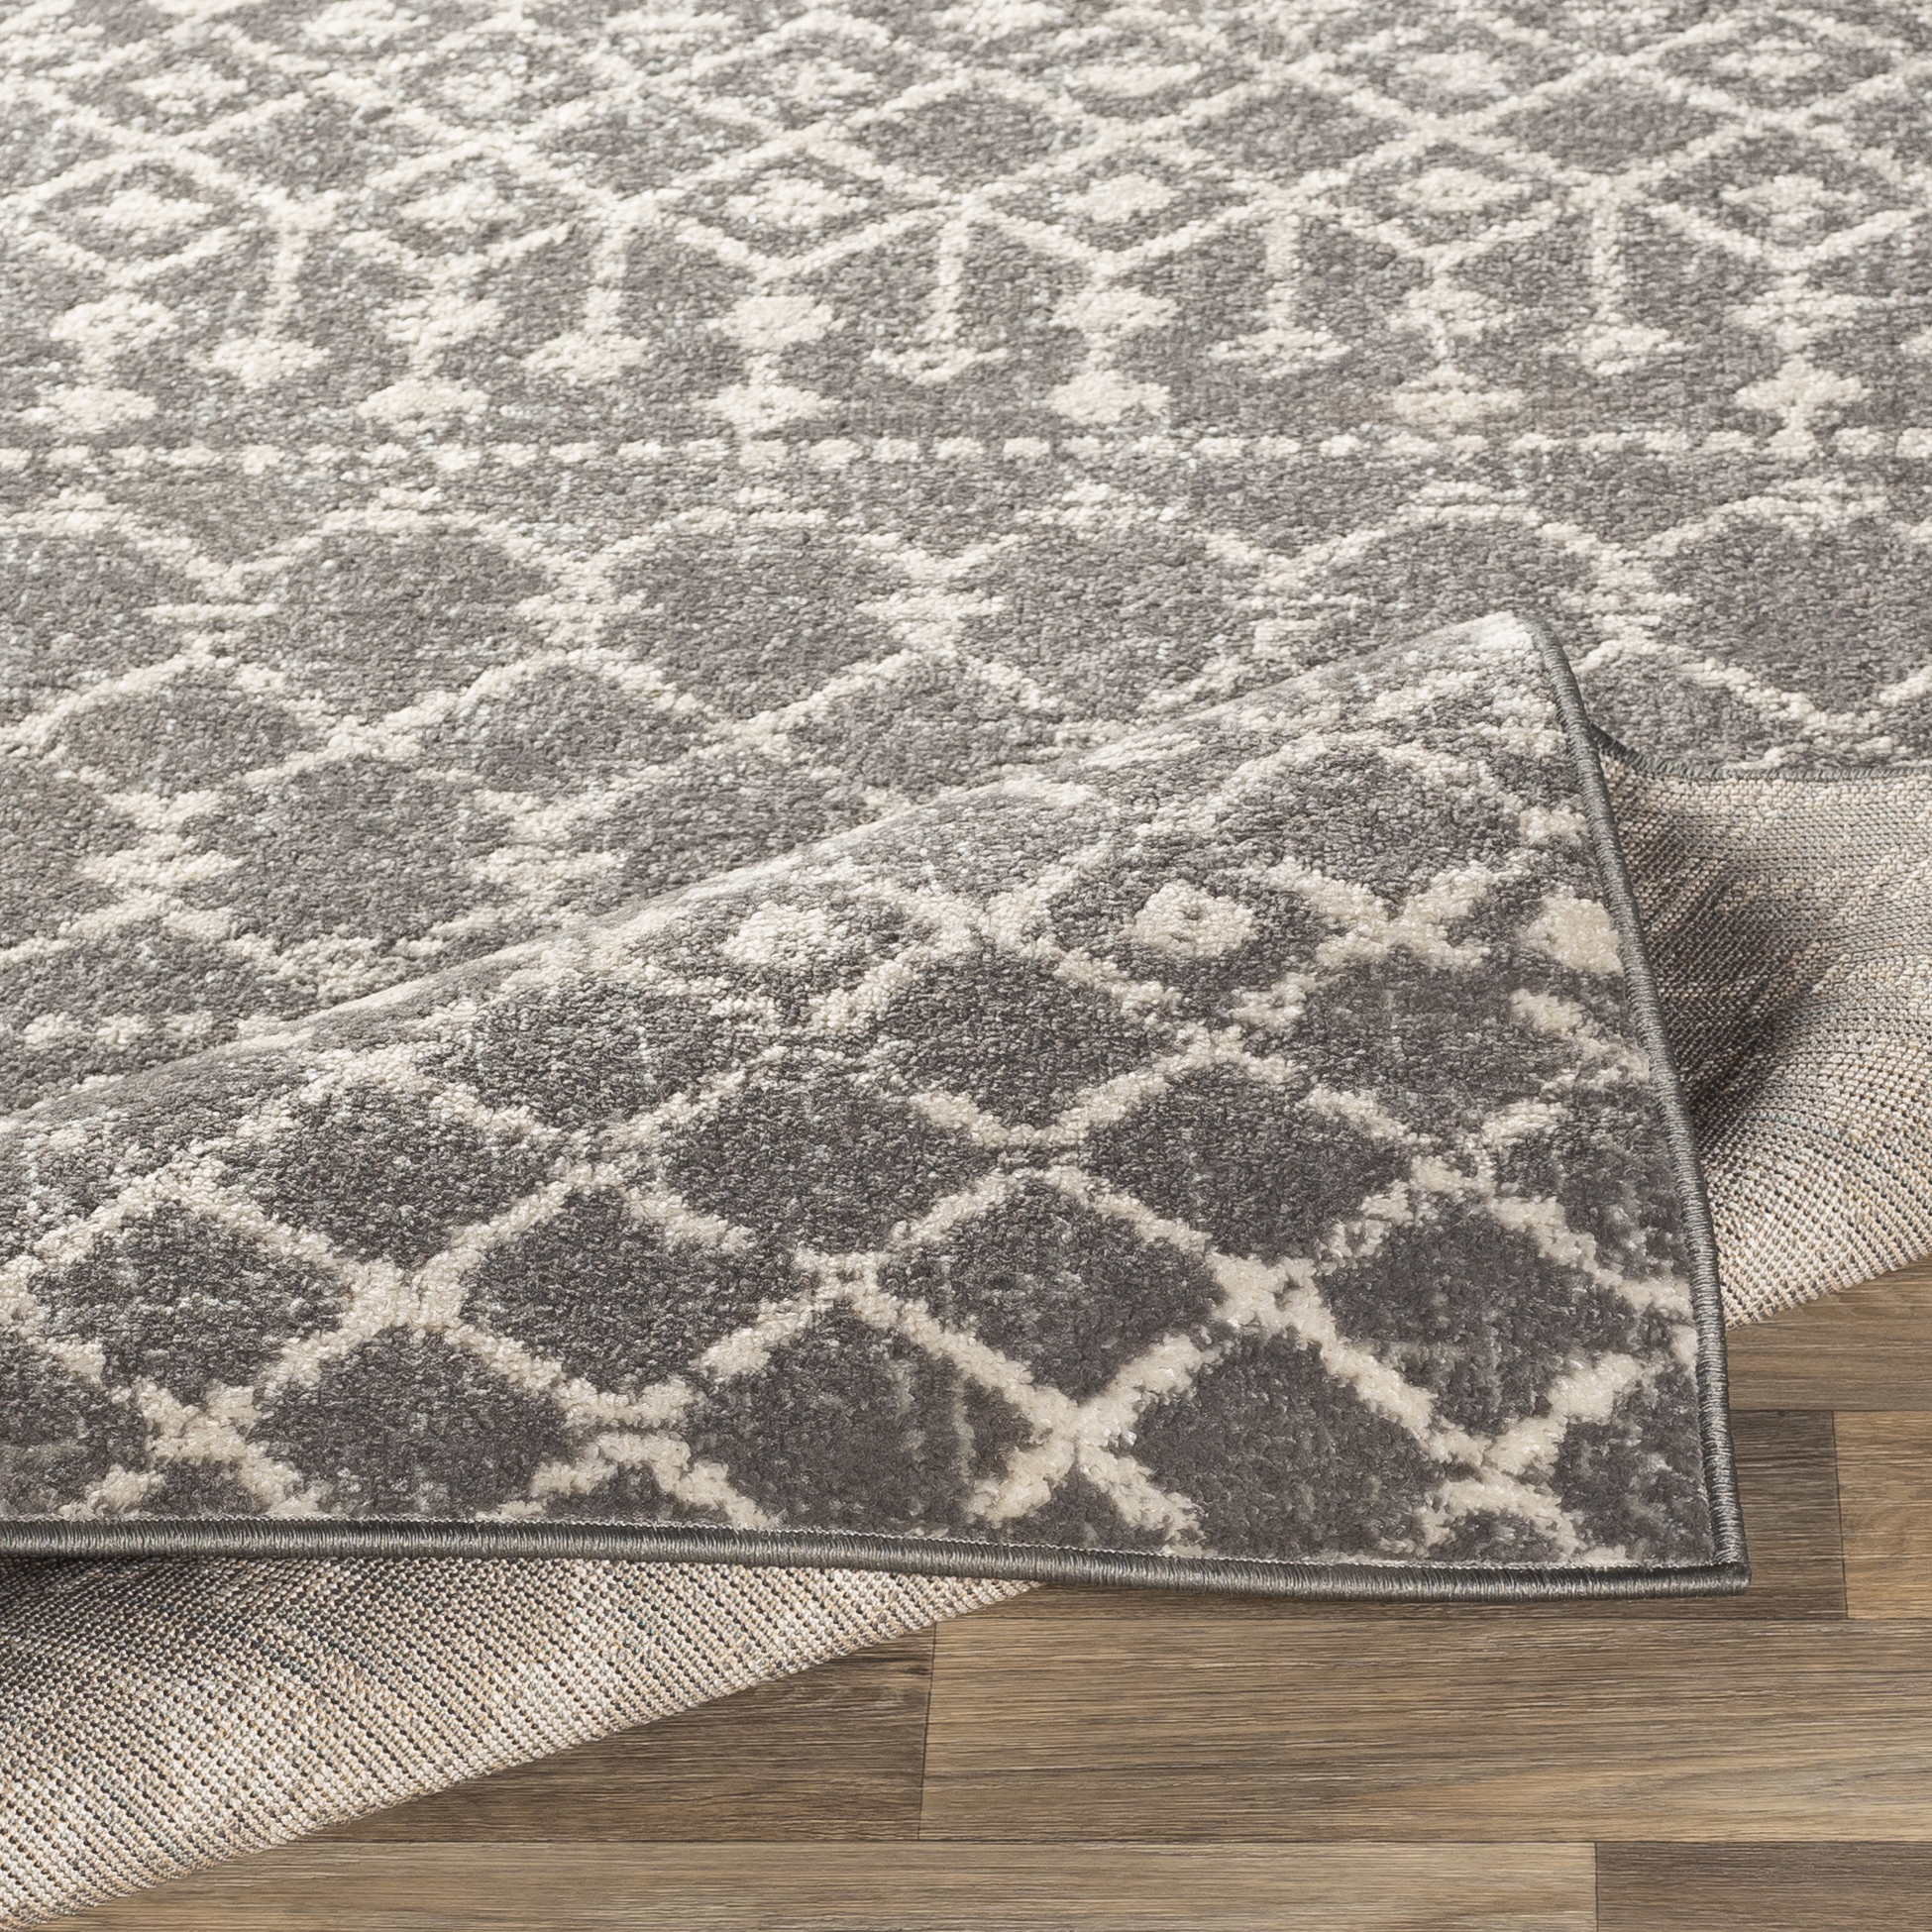 Chester Rug, 7'10" x 10'2" - Image 4